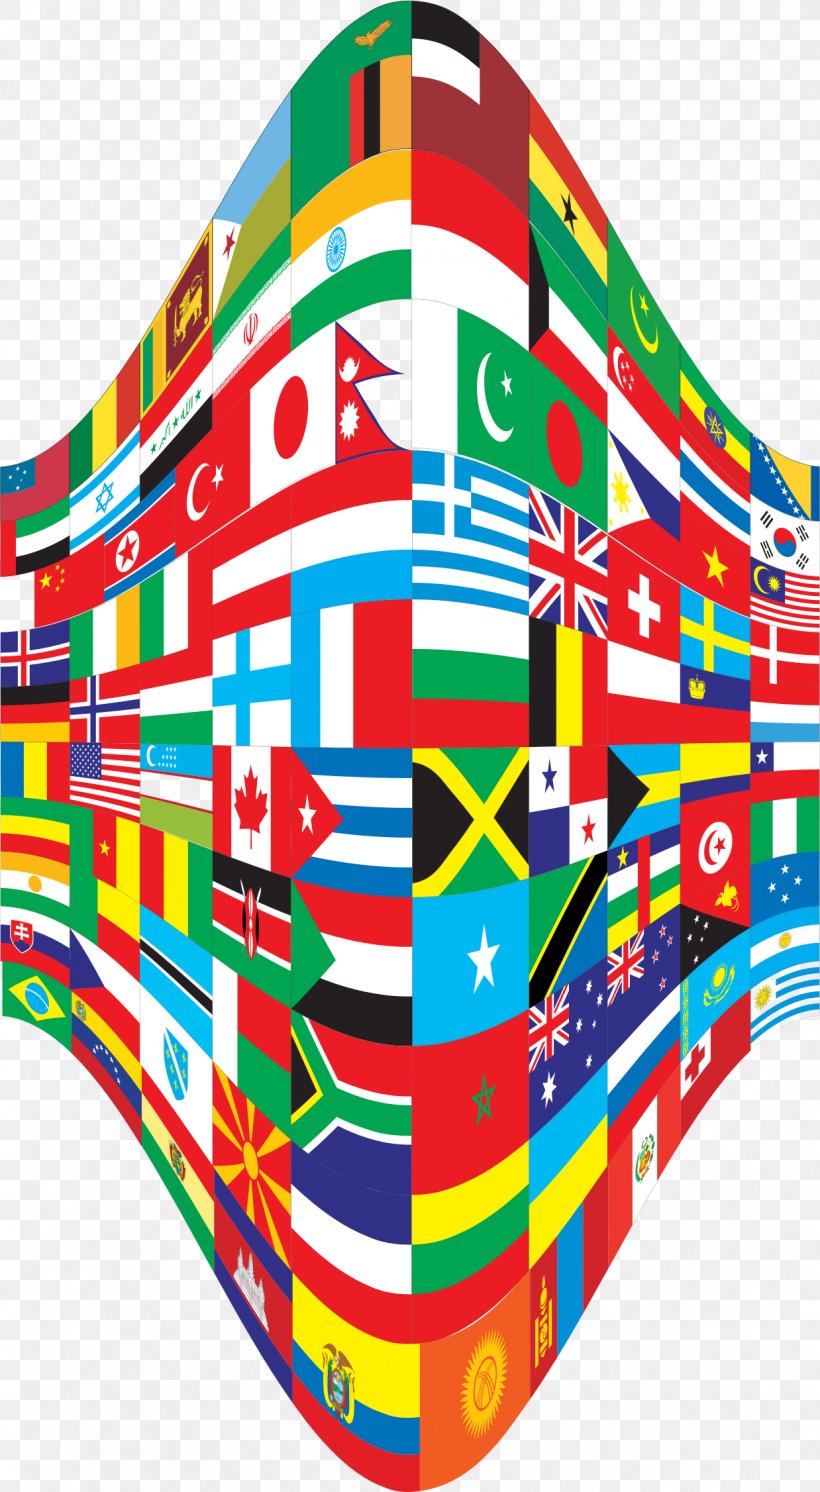 Flags Of The World Perspective Clip Art, PNG, 1238x2253px, Flag, Flag Of Earth, Flag Of Serbia, Flag Of Serbia And Montenegro, Flags Of The World Download Free